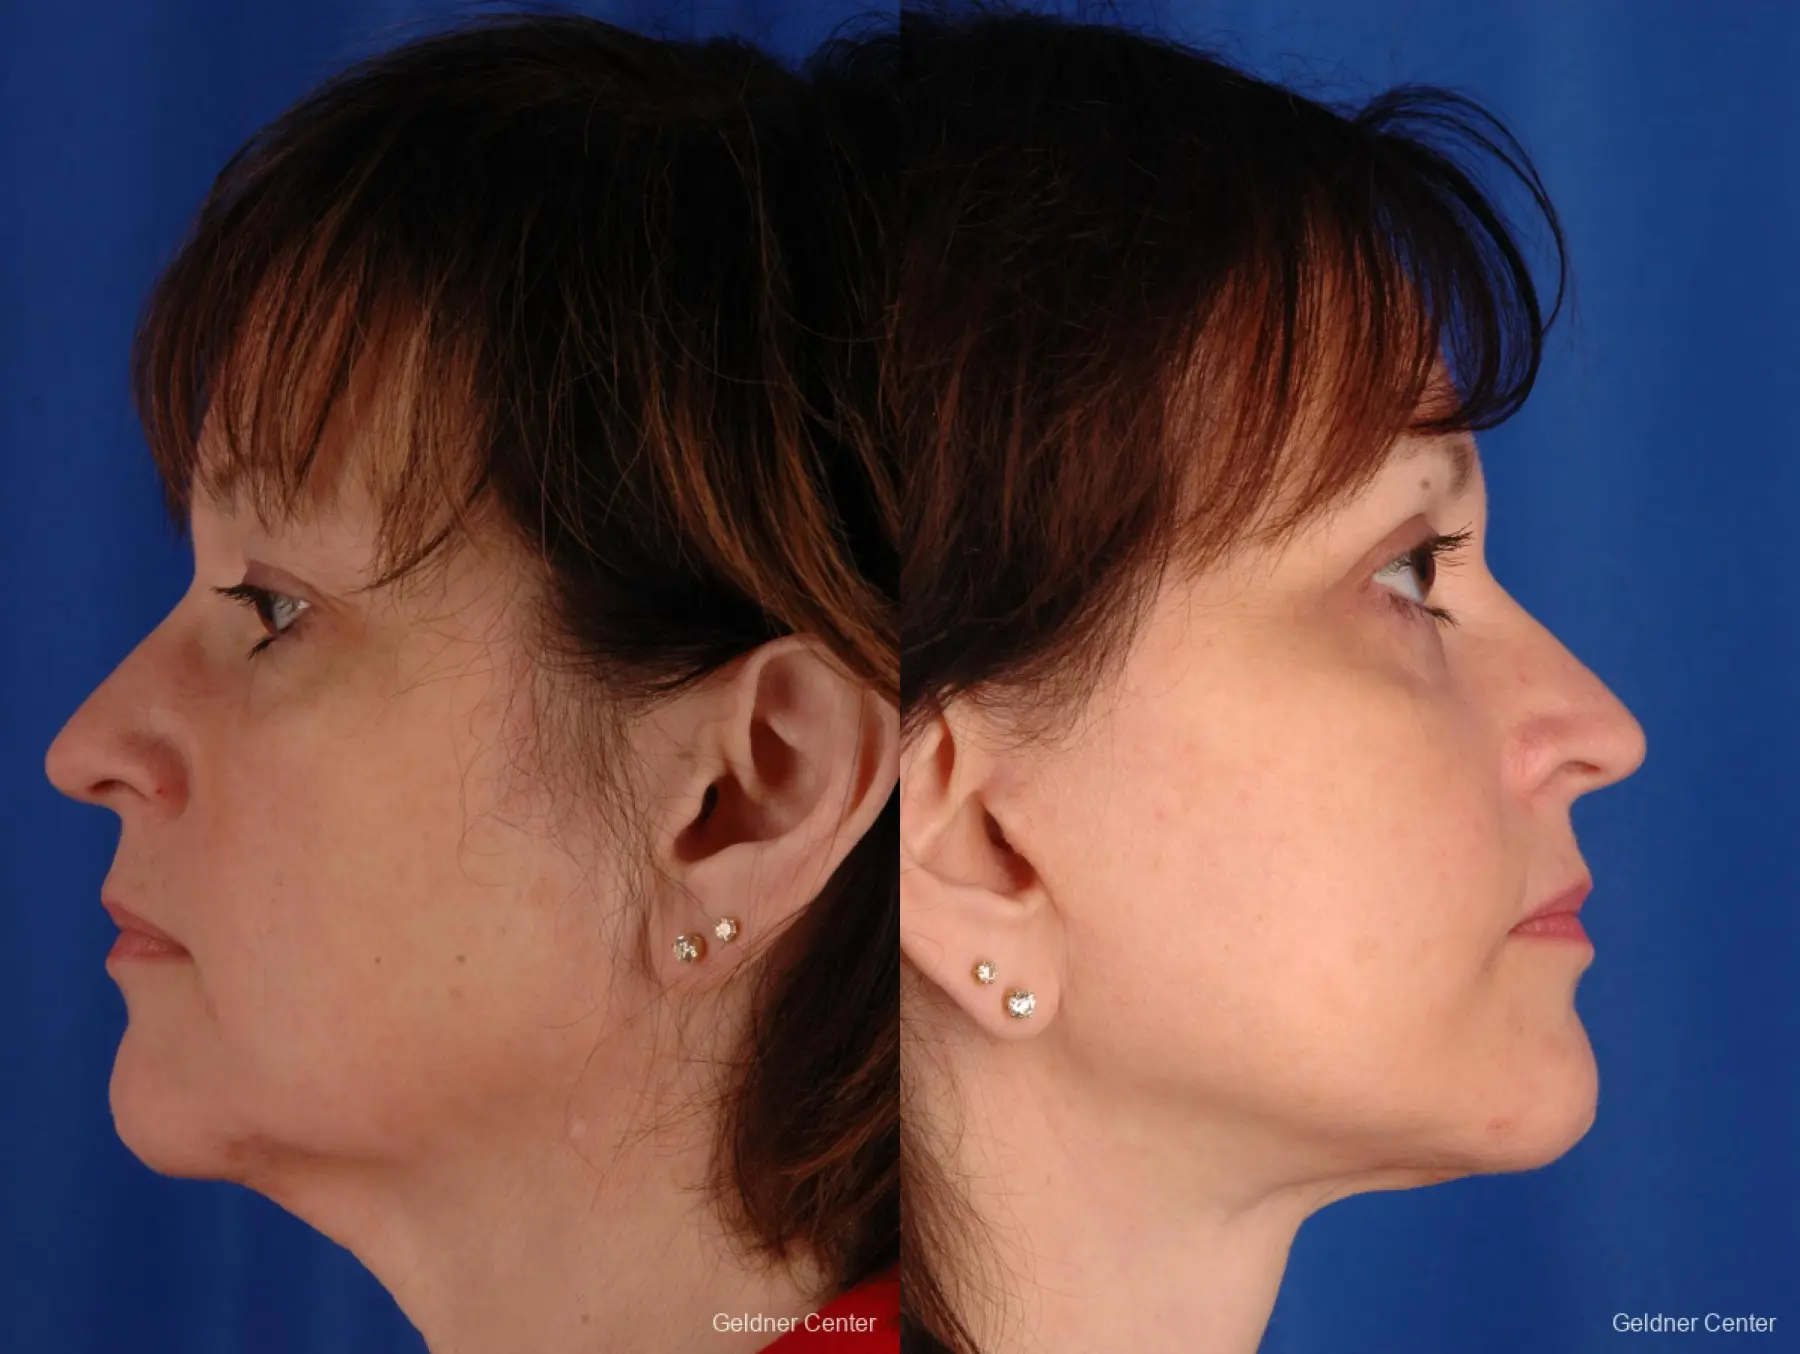 Neck Lift: Patient 2 - Before and After 2